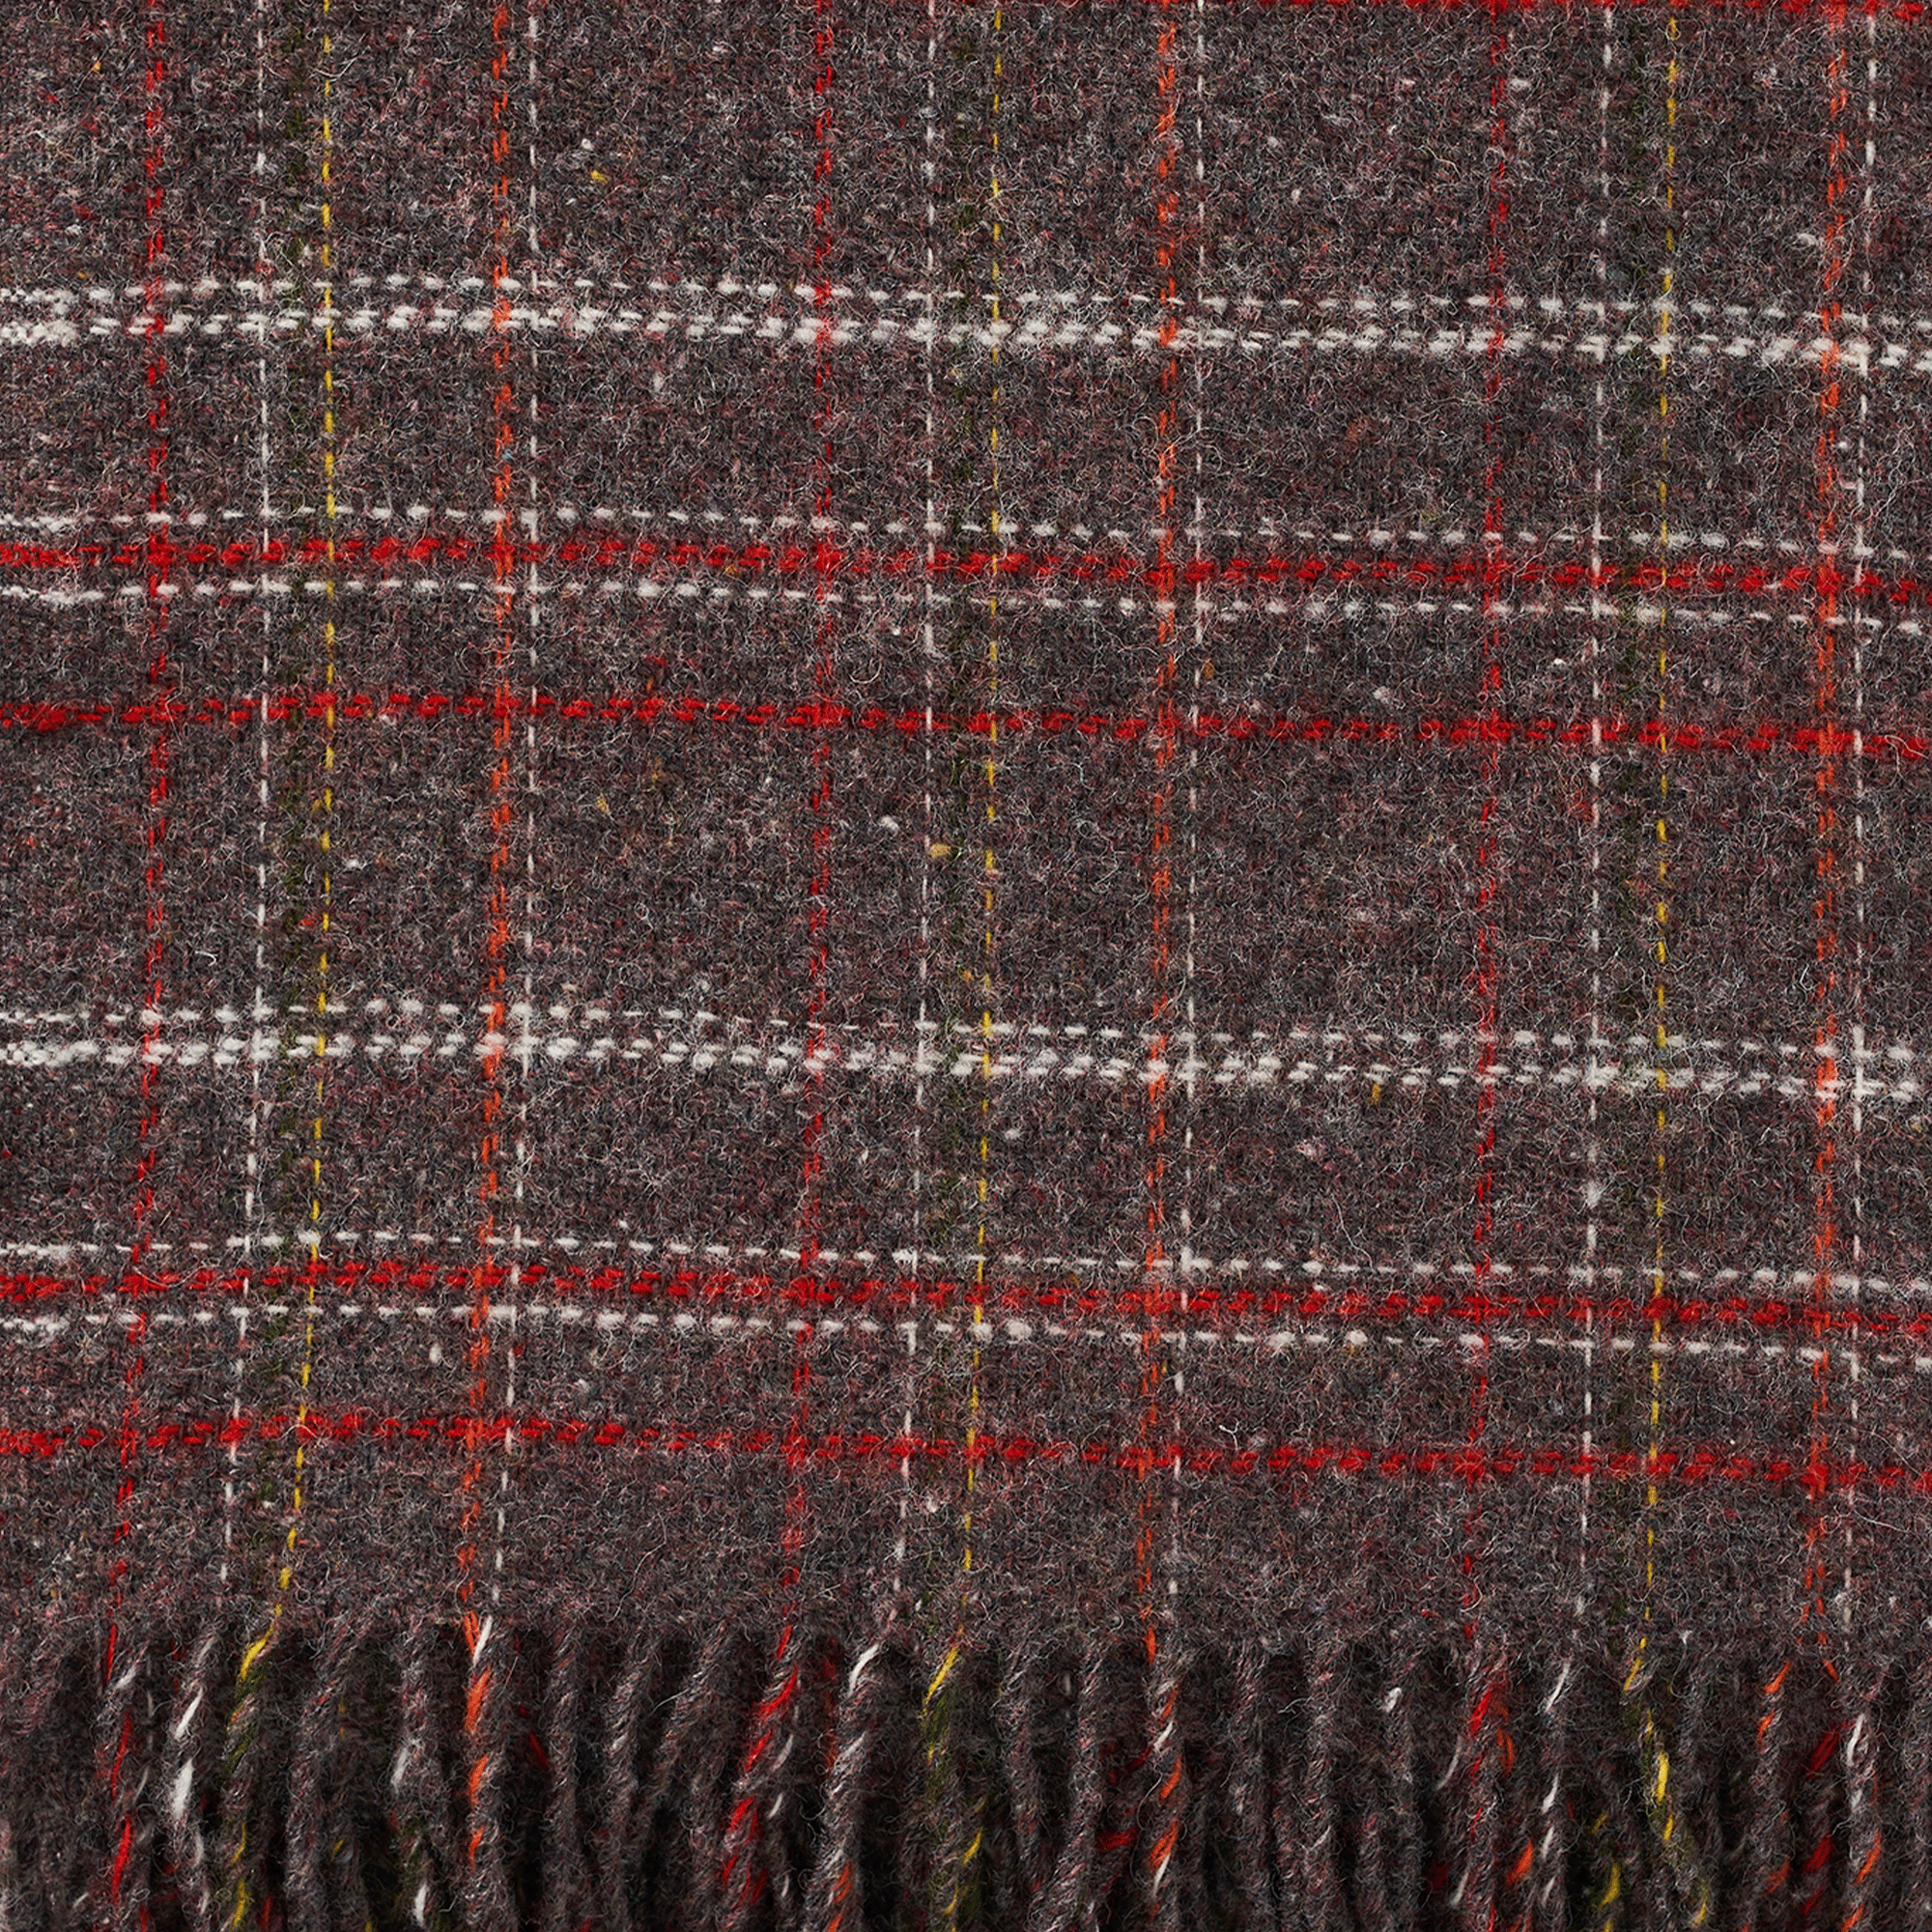 Square Brown/Red 130x200cm Recycled Wool Throw